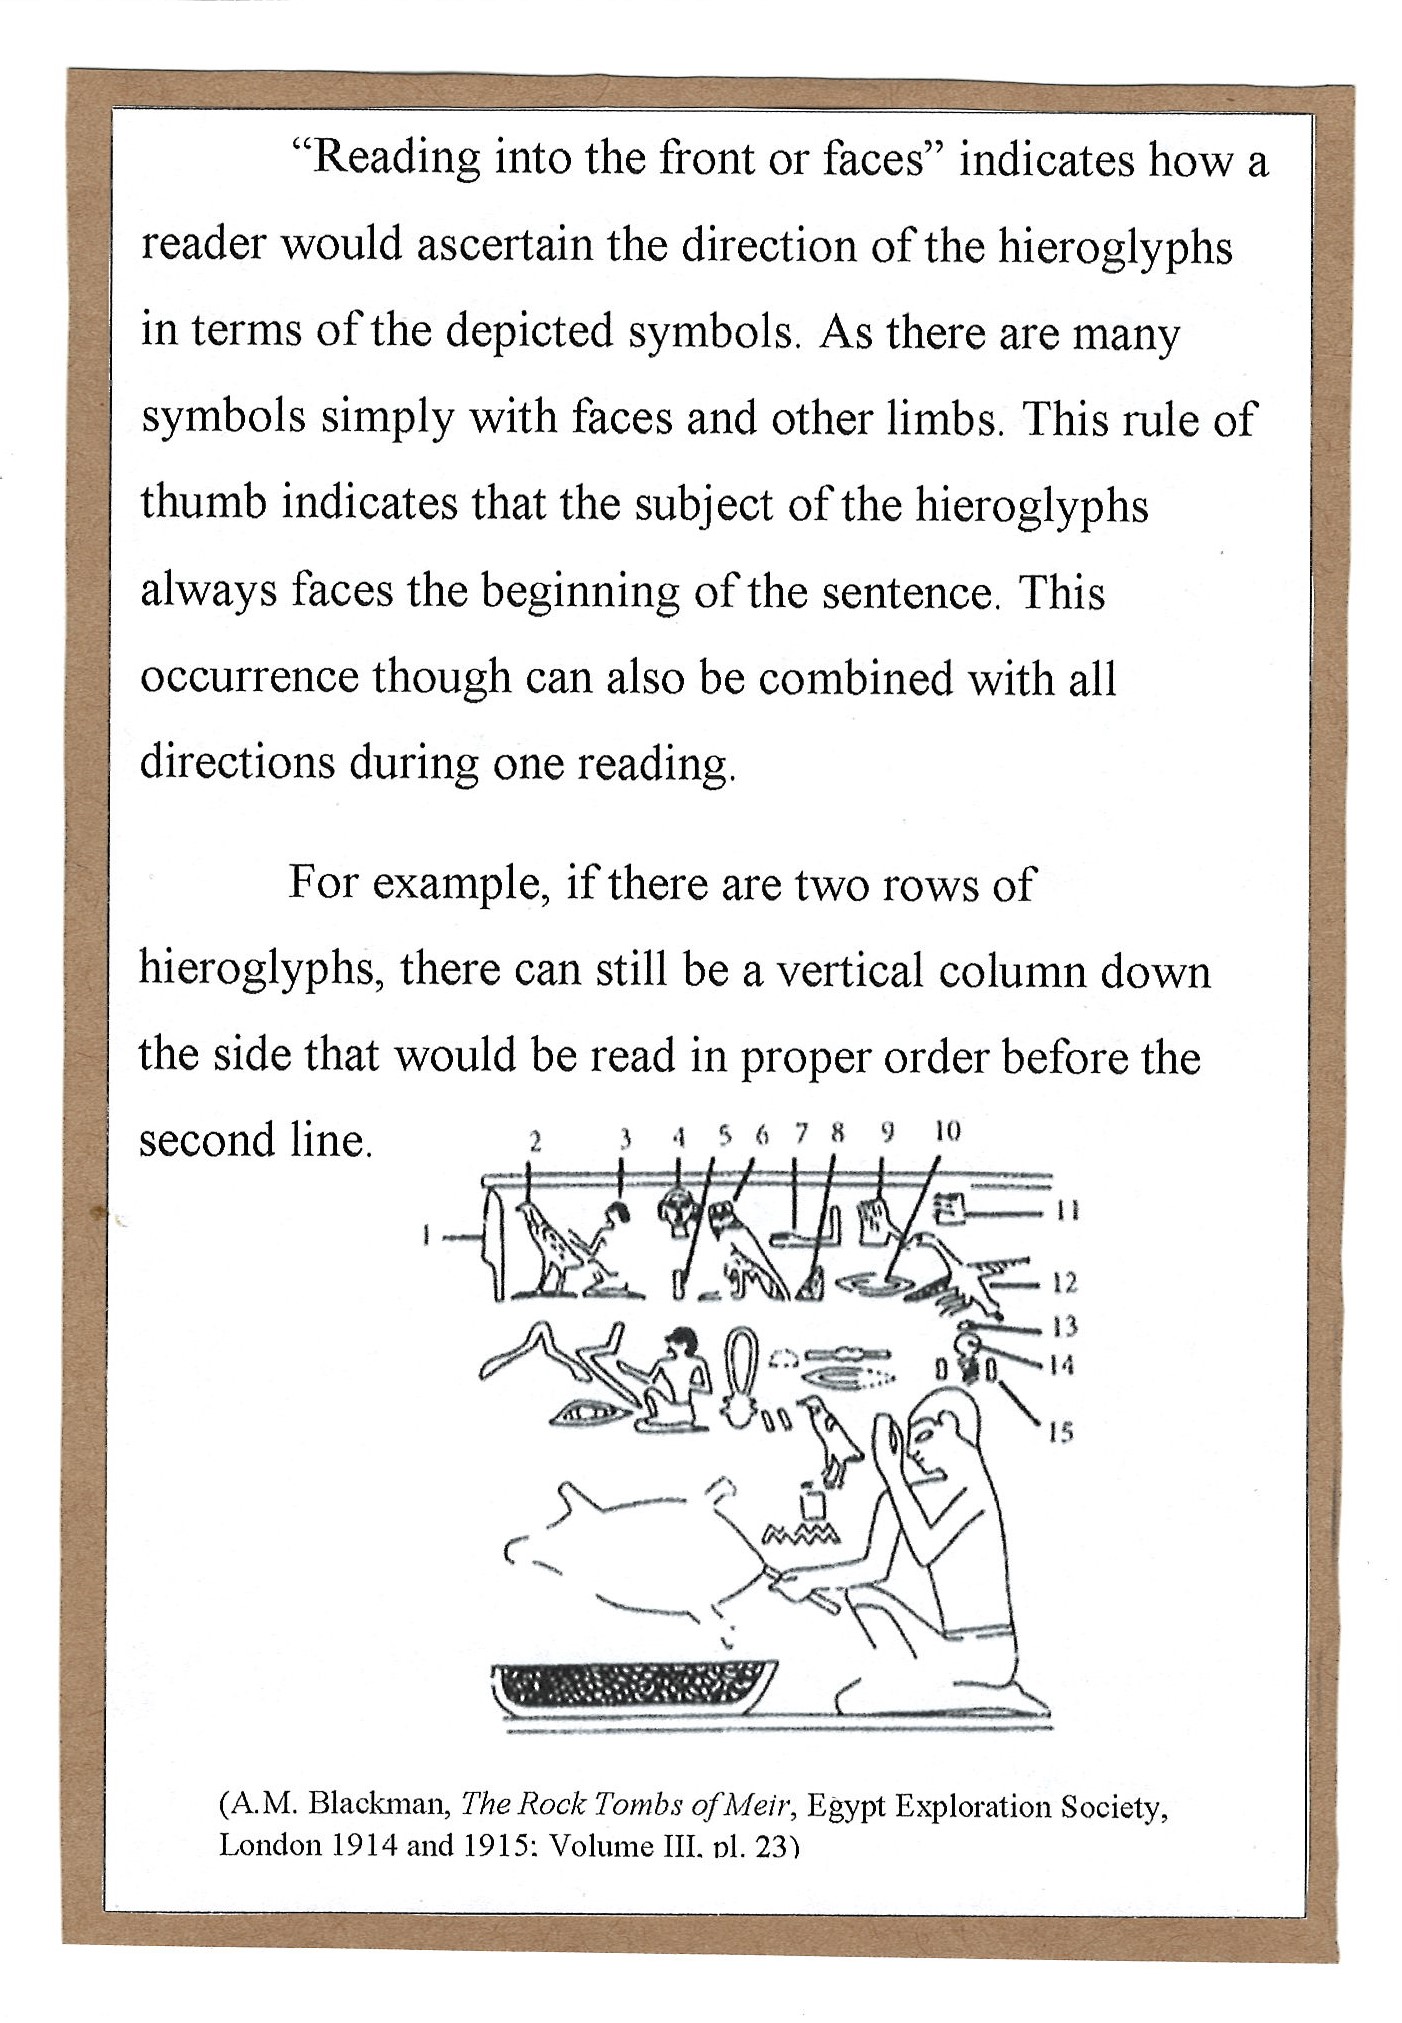 Page 9. Applying this new lesson of directional reading on an ancient hieroglyph now displayed in the British Museum.